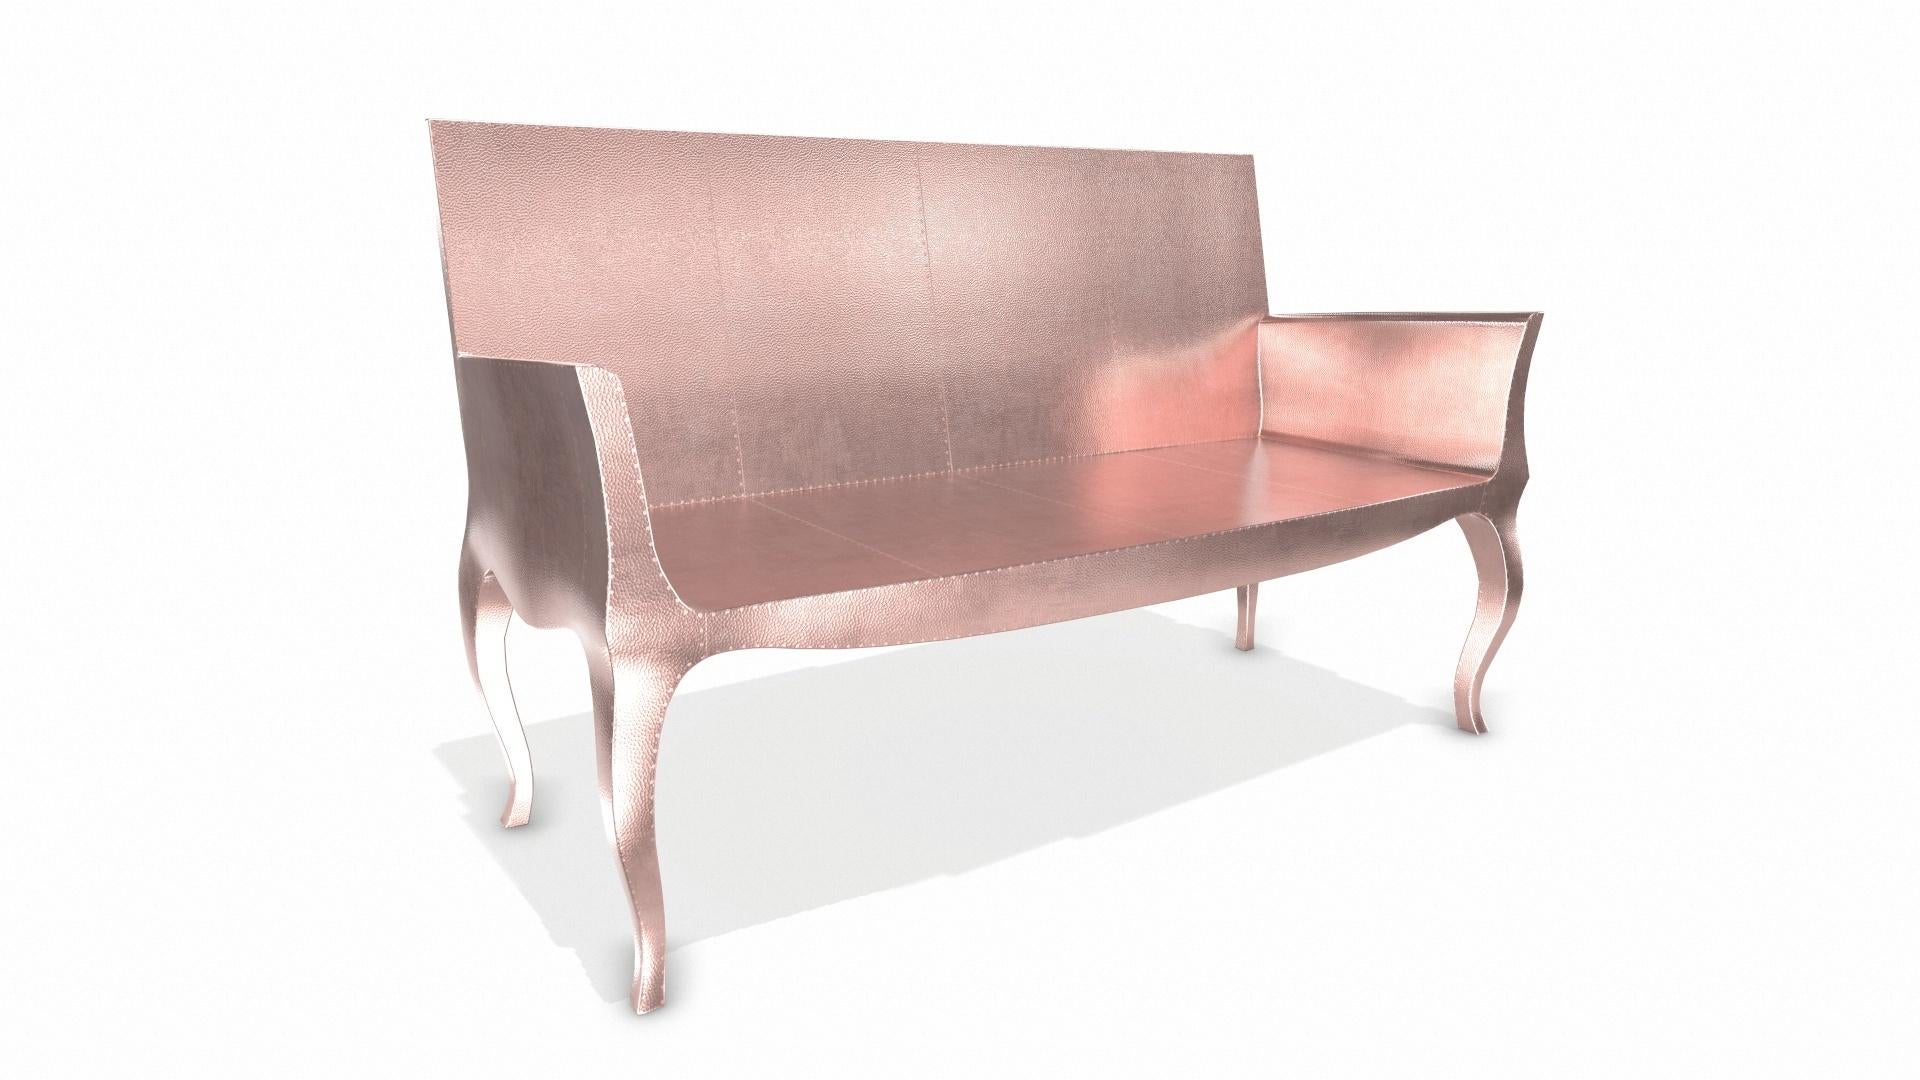 Contemporary Louise Settee Art Deco Loveseats in Mid. Hammered Copper by Paul Mathieu For Sale